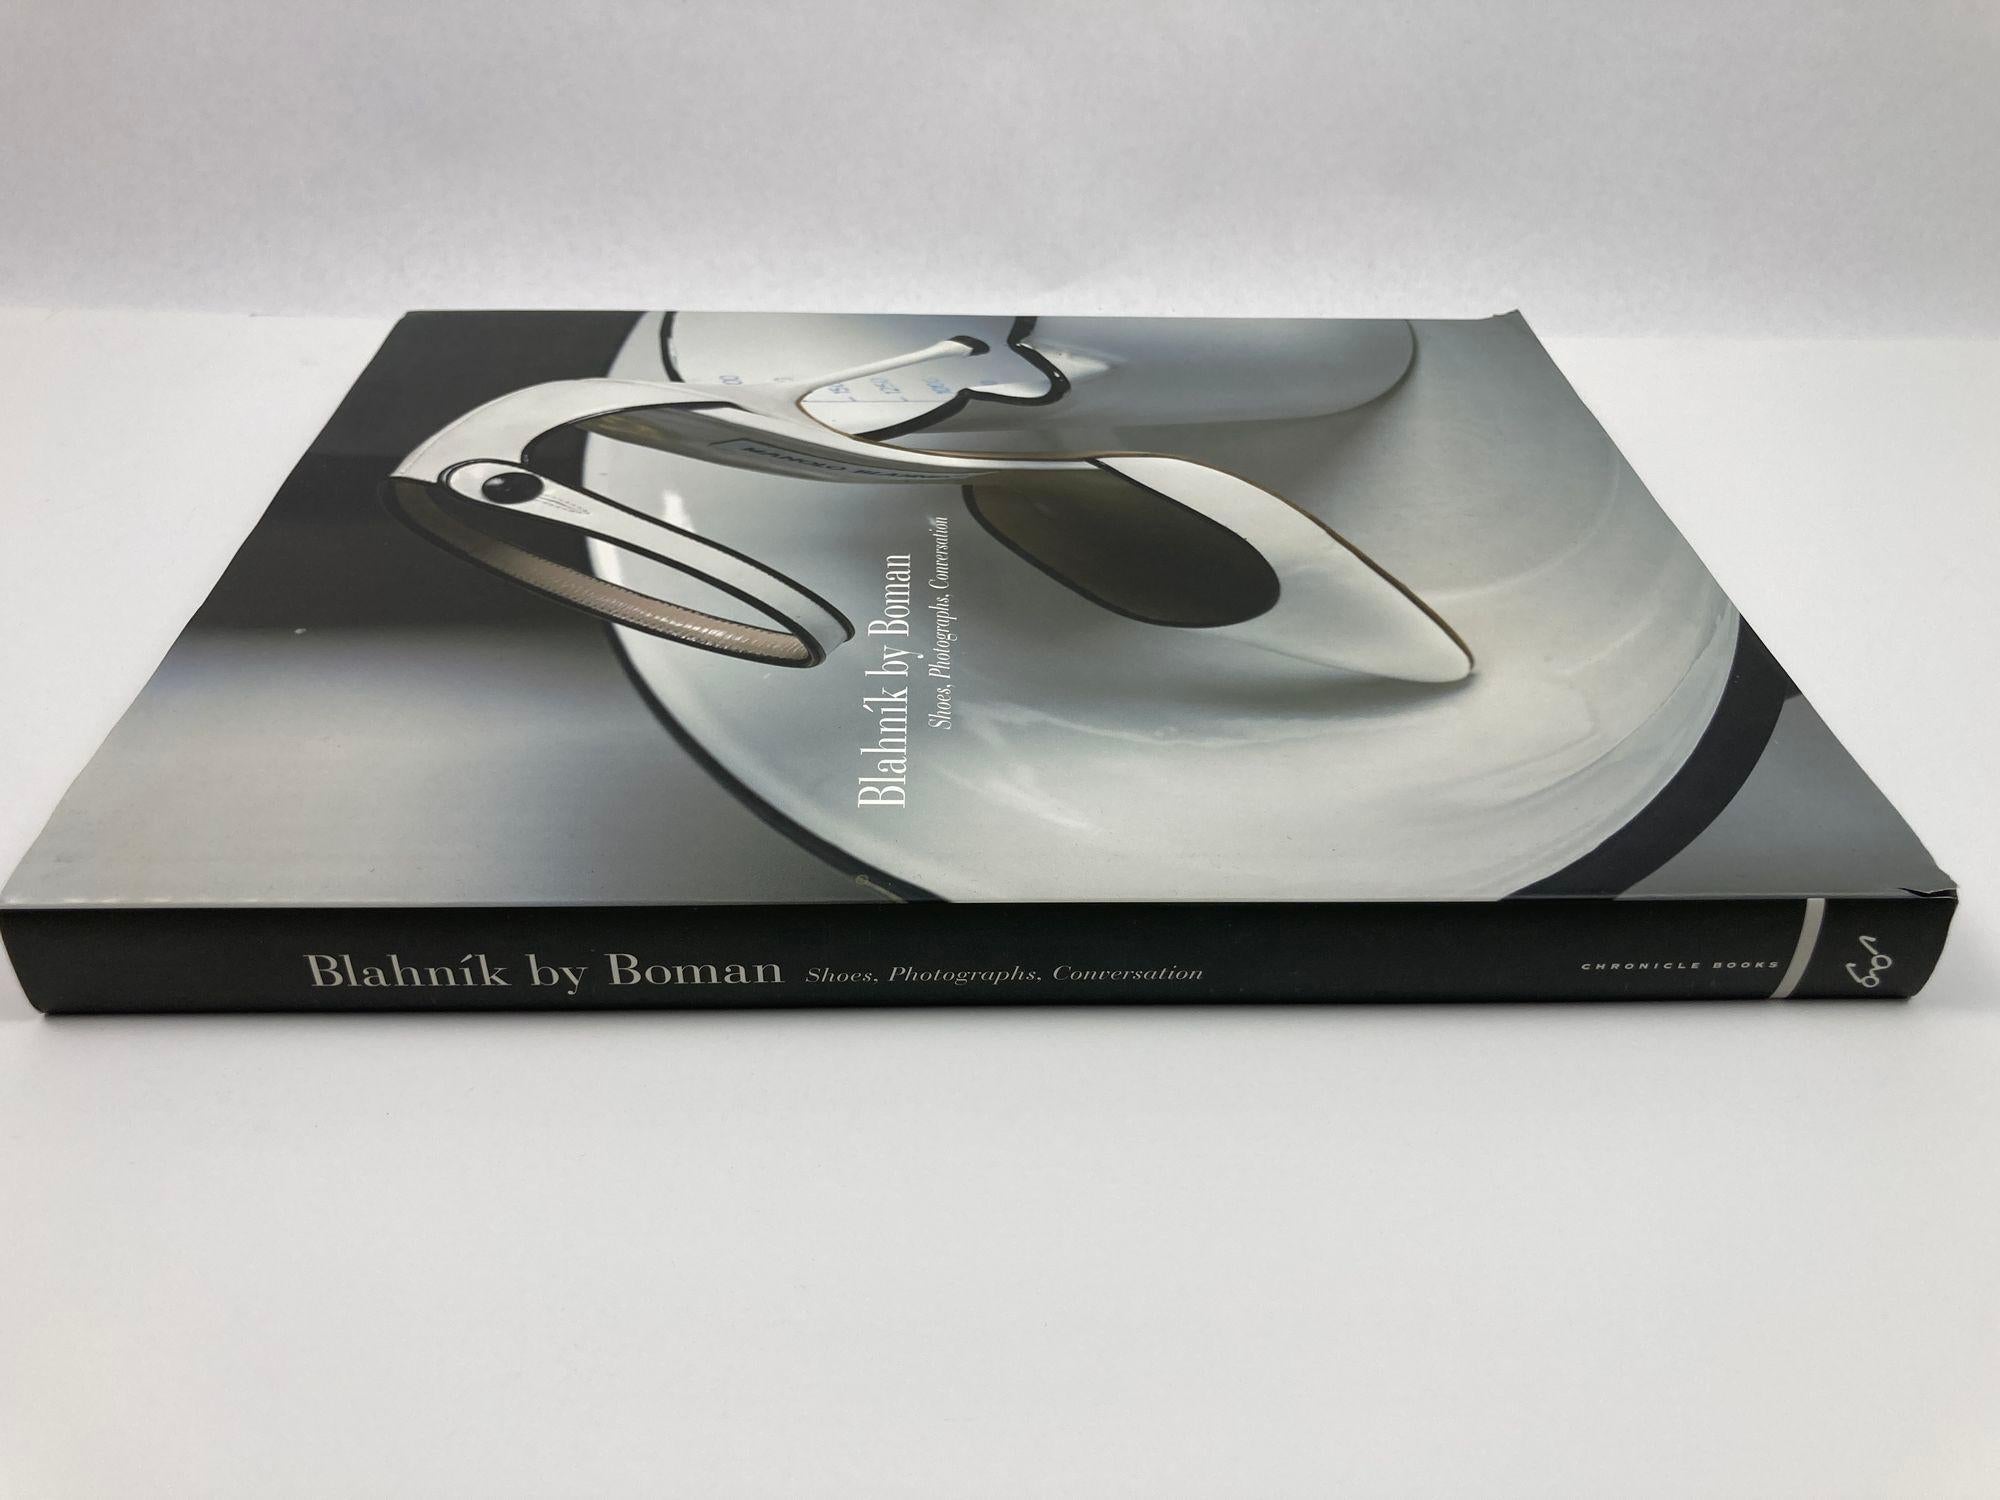 Neoclassical Blahnik by Boman: Shoes, Photographs, ConversationLarge Coffee Table Book